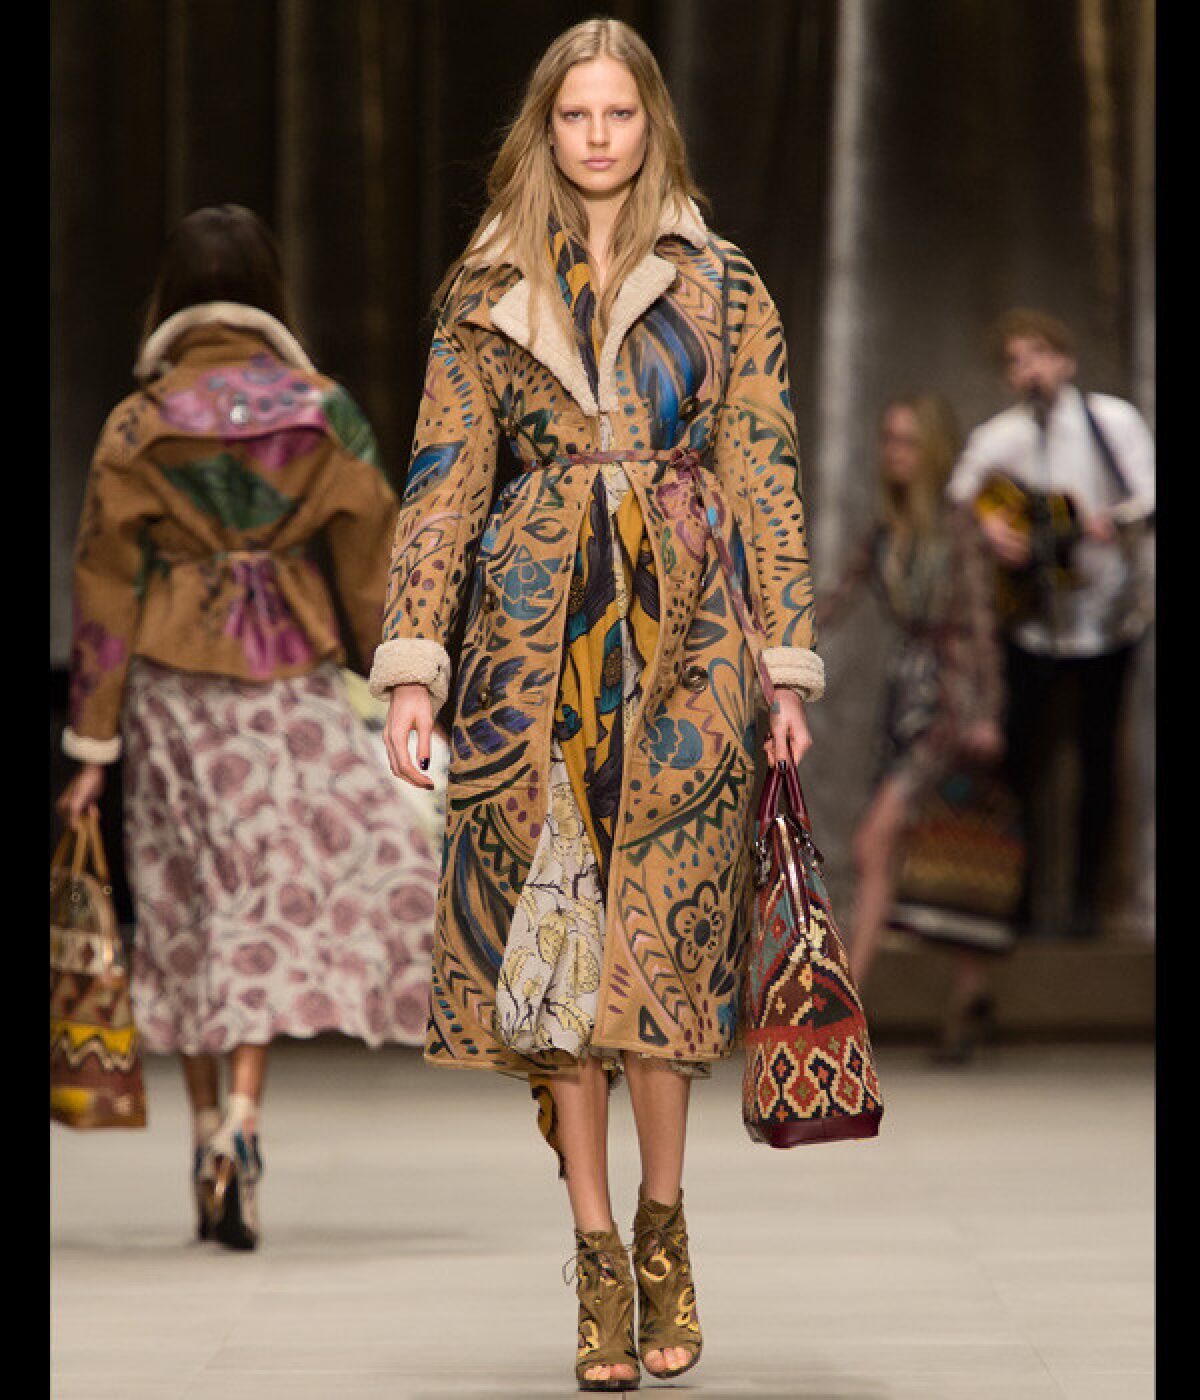 Burberry Prorsum hand-painted bonded sheepskin trench coat and panelled floral-print silk georgette dress.